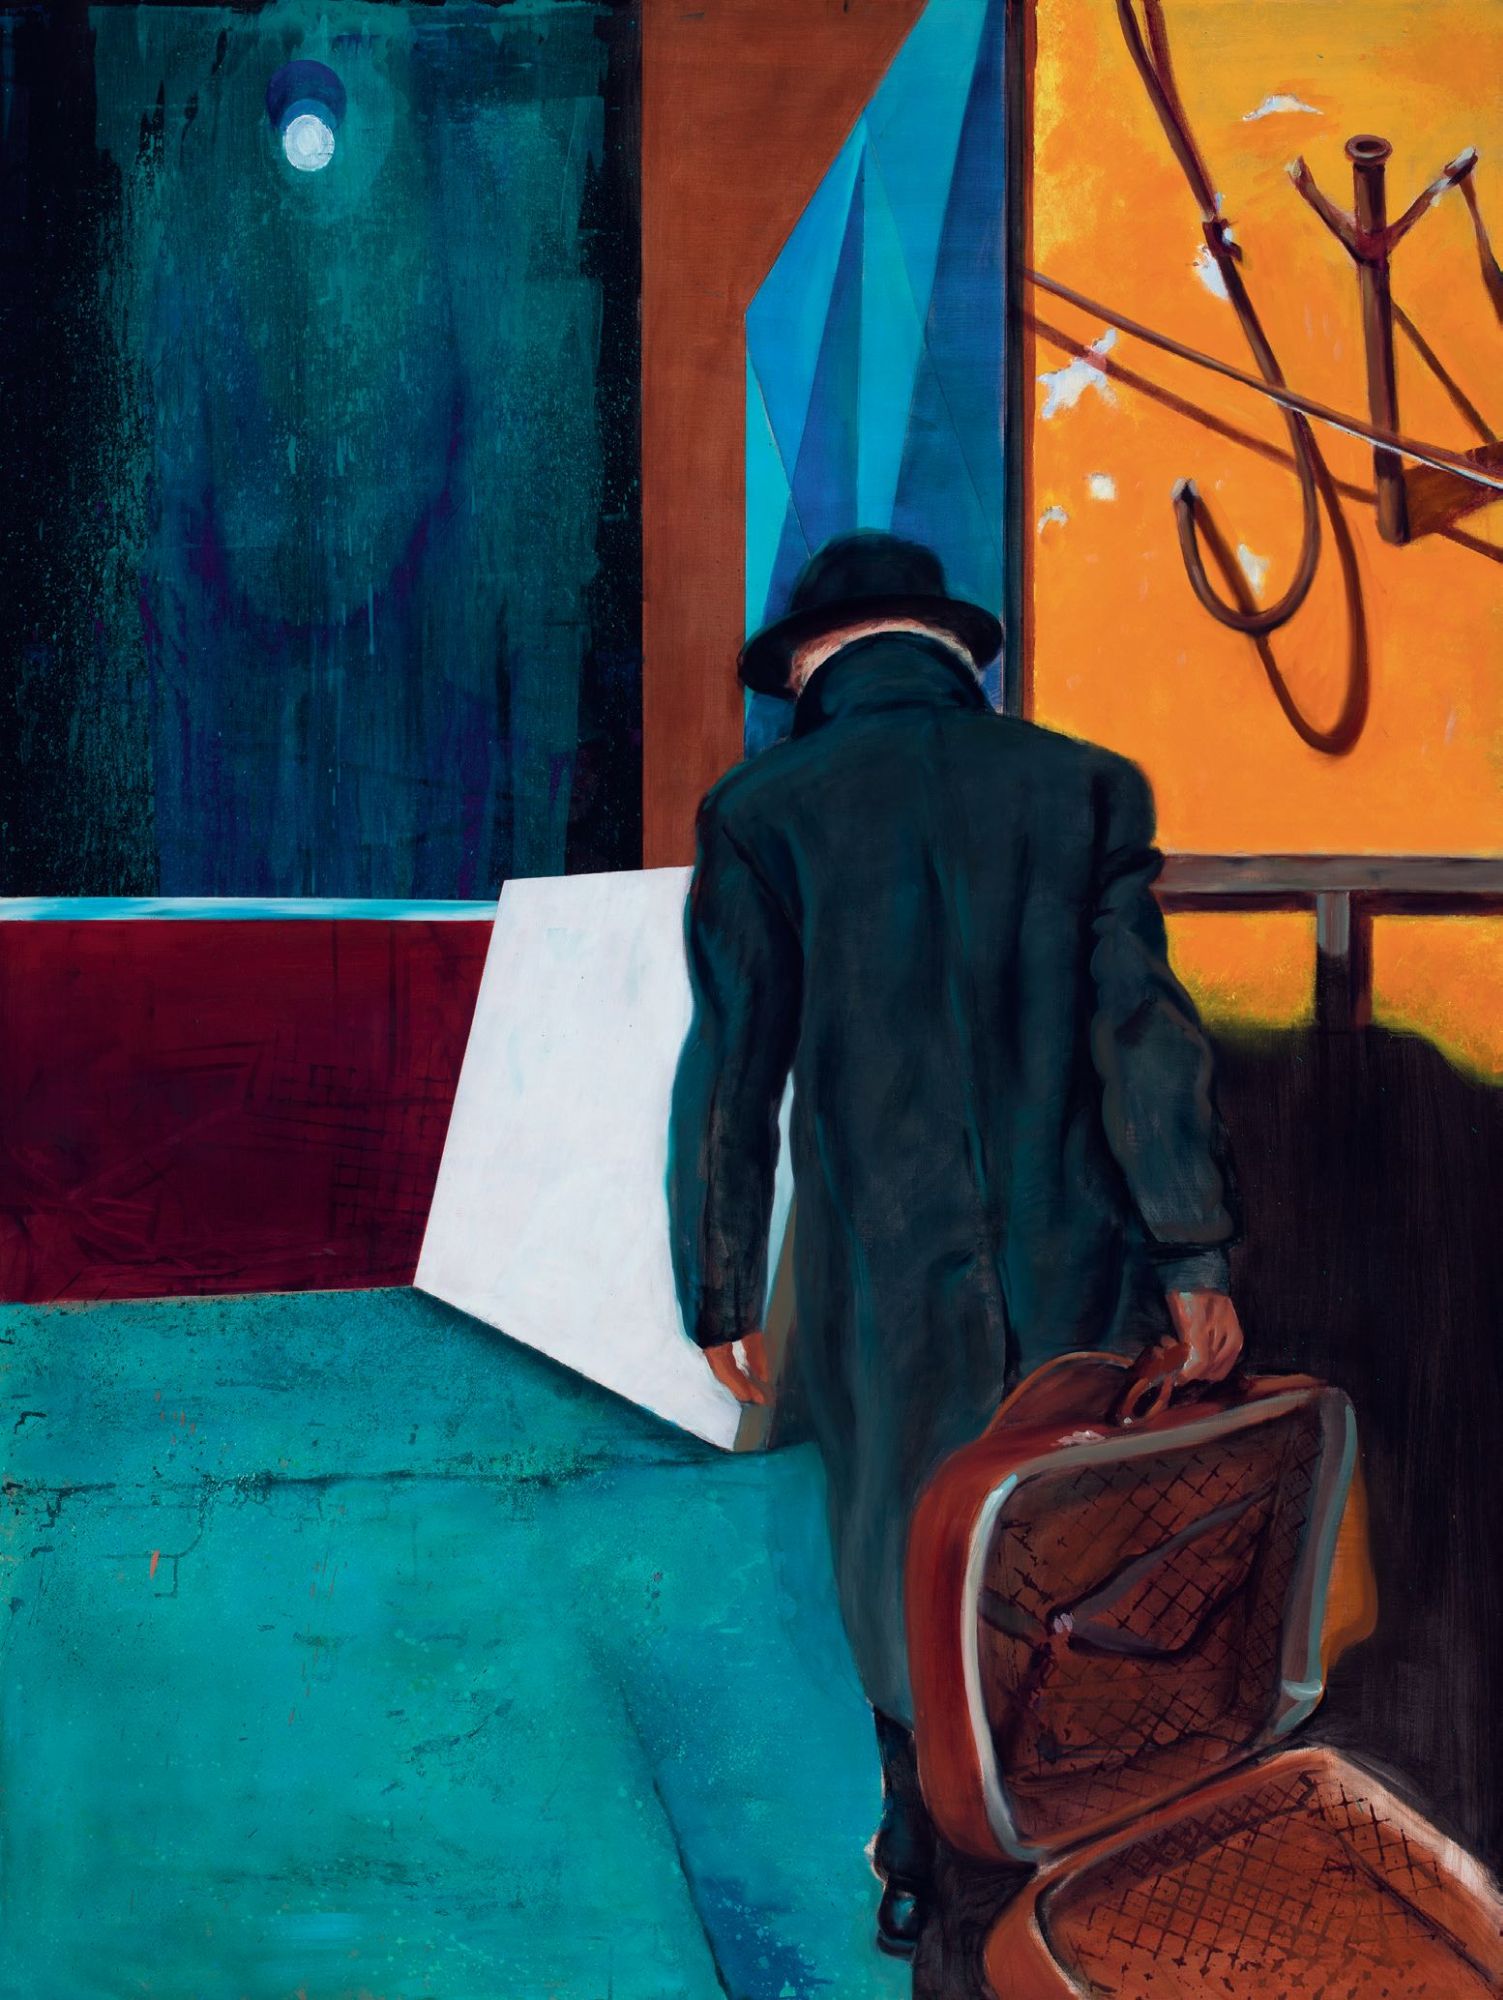 Man With a Suitcase